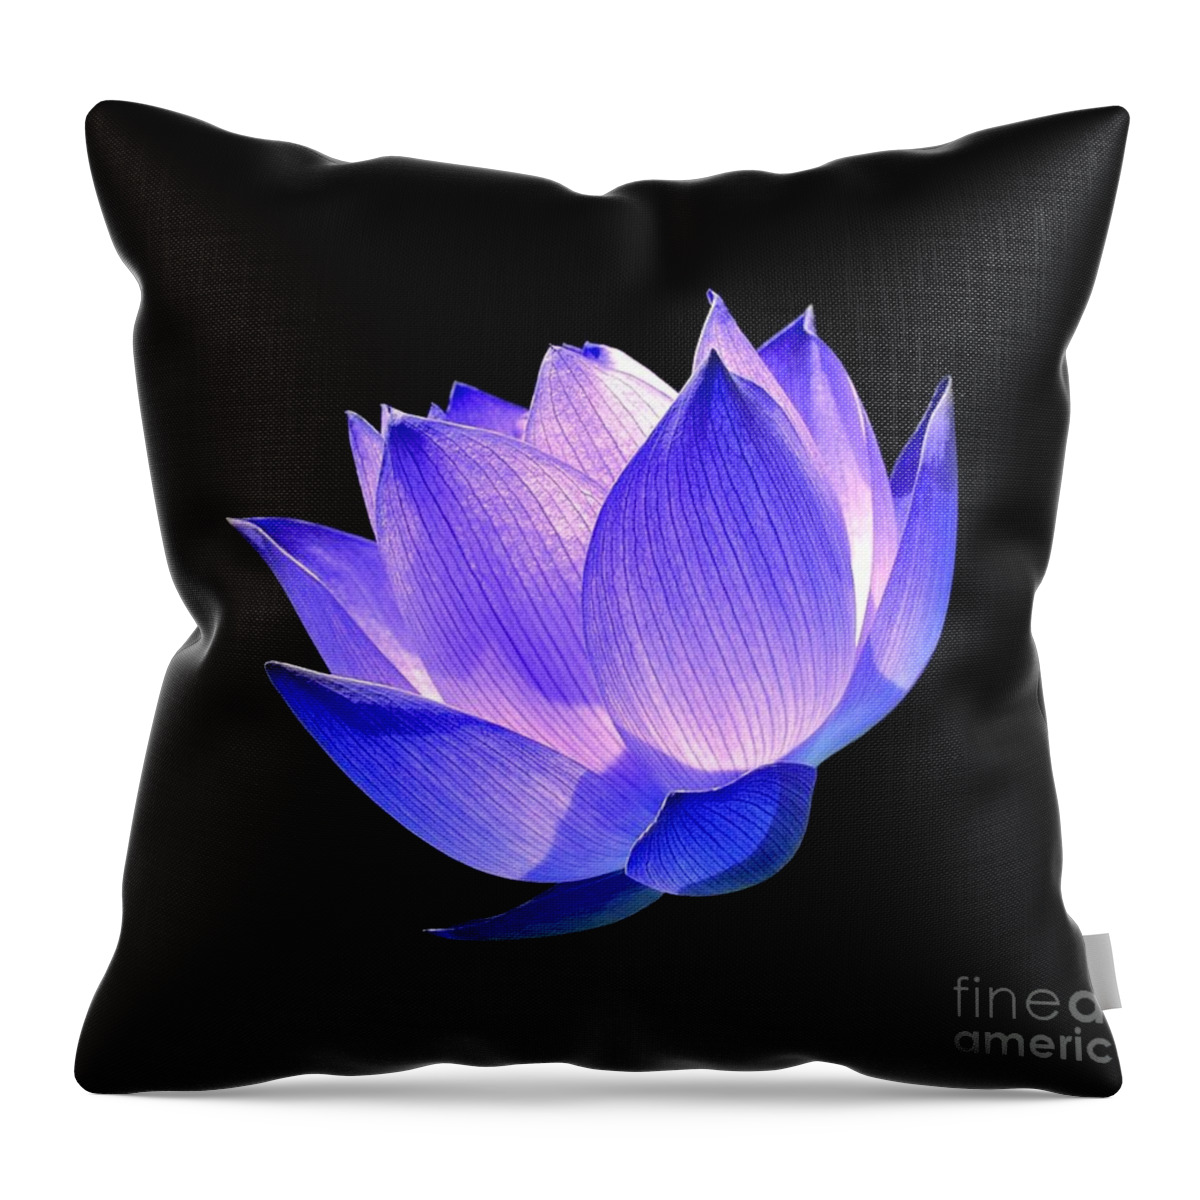 Flower Throw Pillow featuring the photograph Enlightened by Jacky Gerritsen